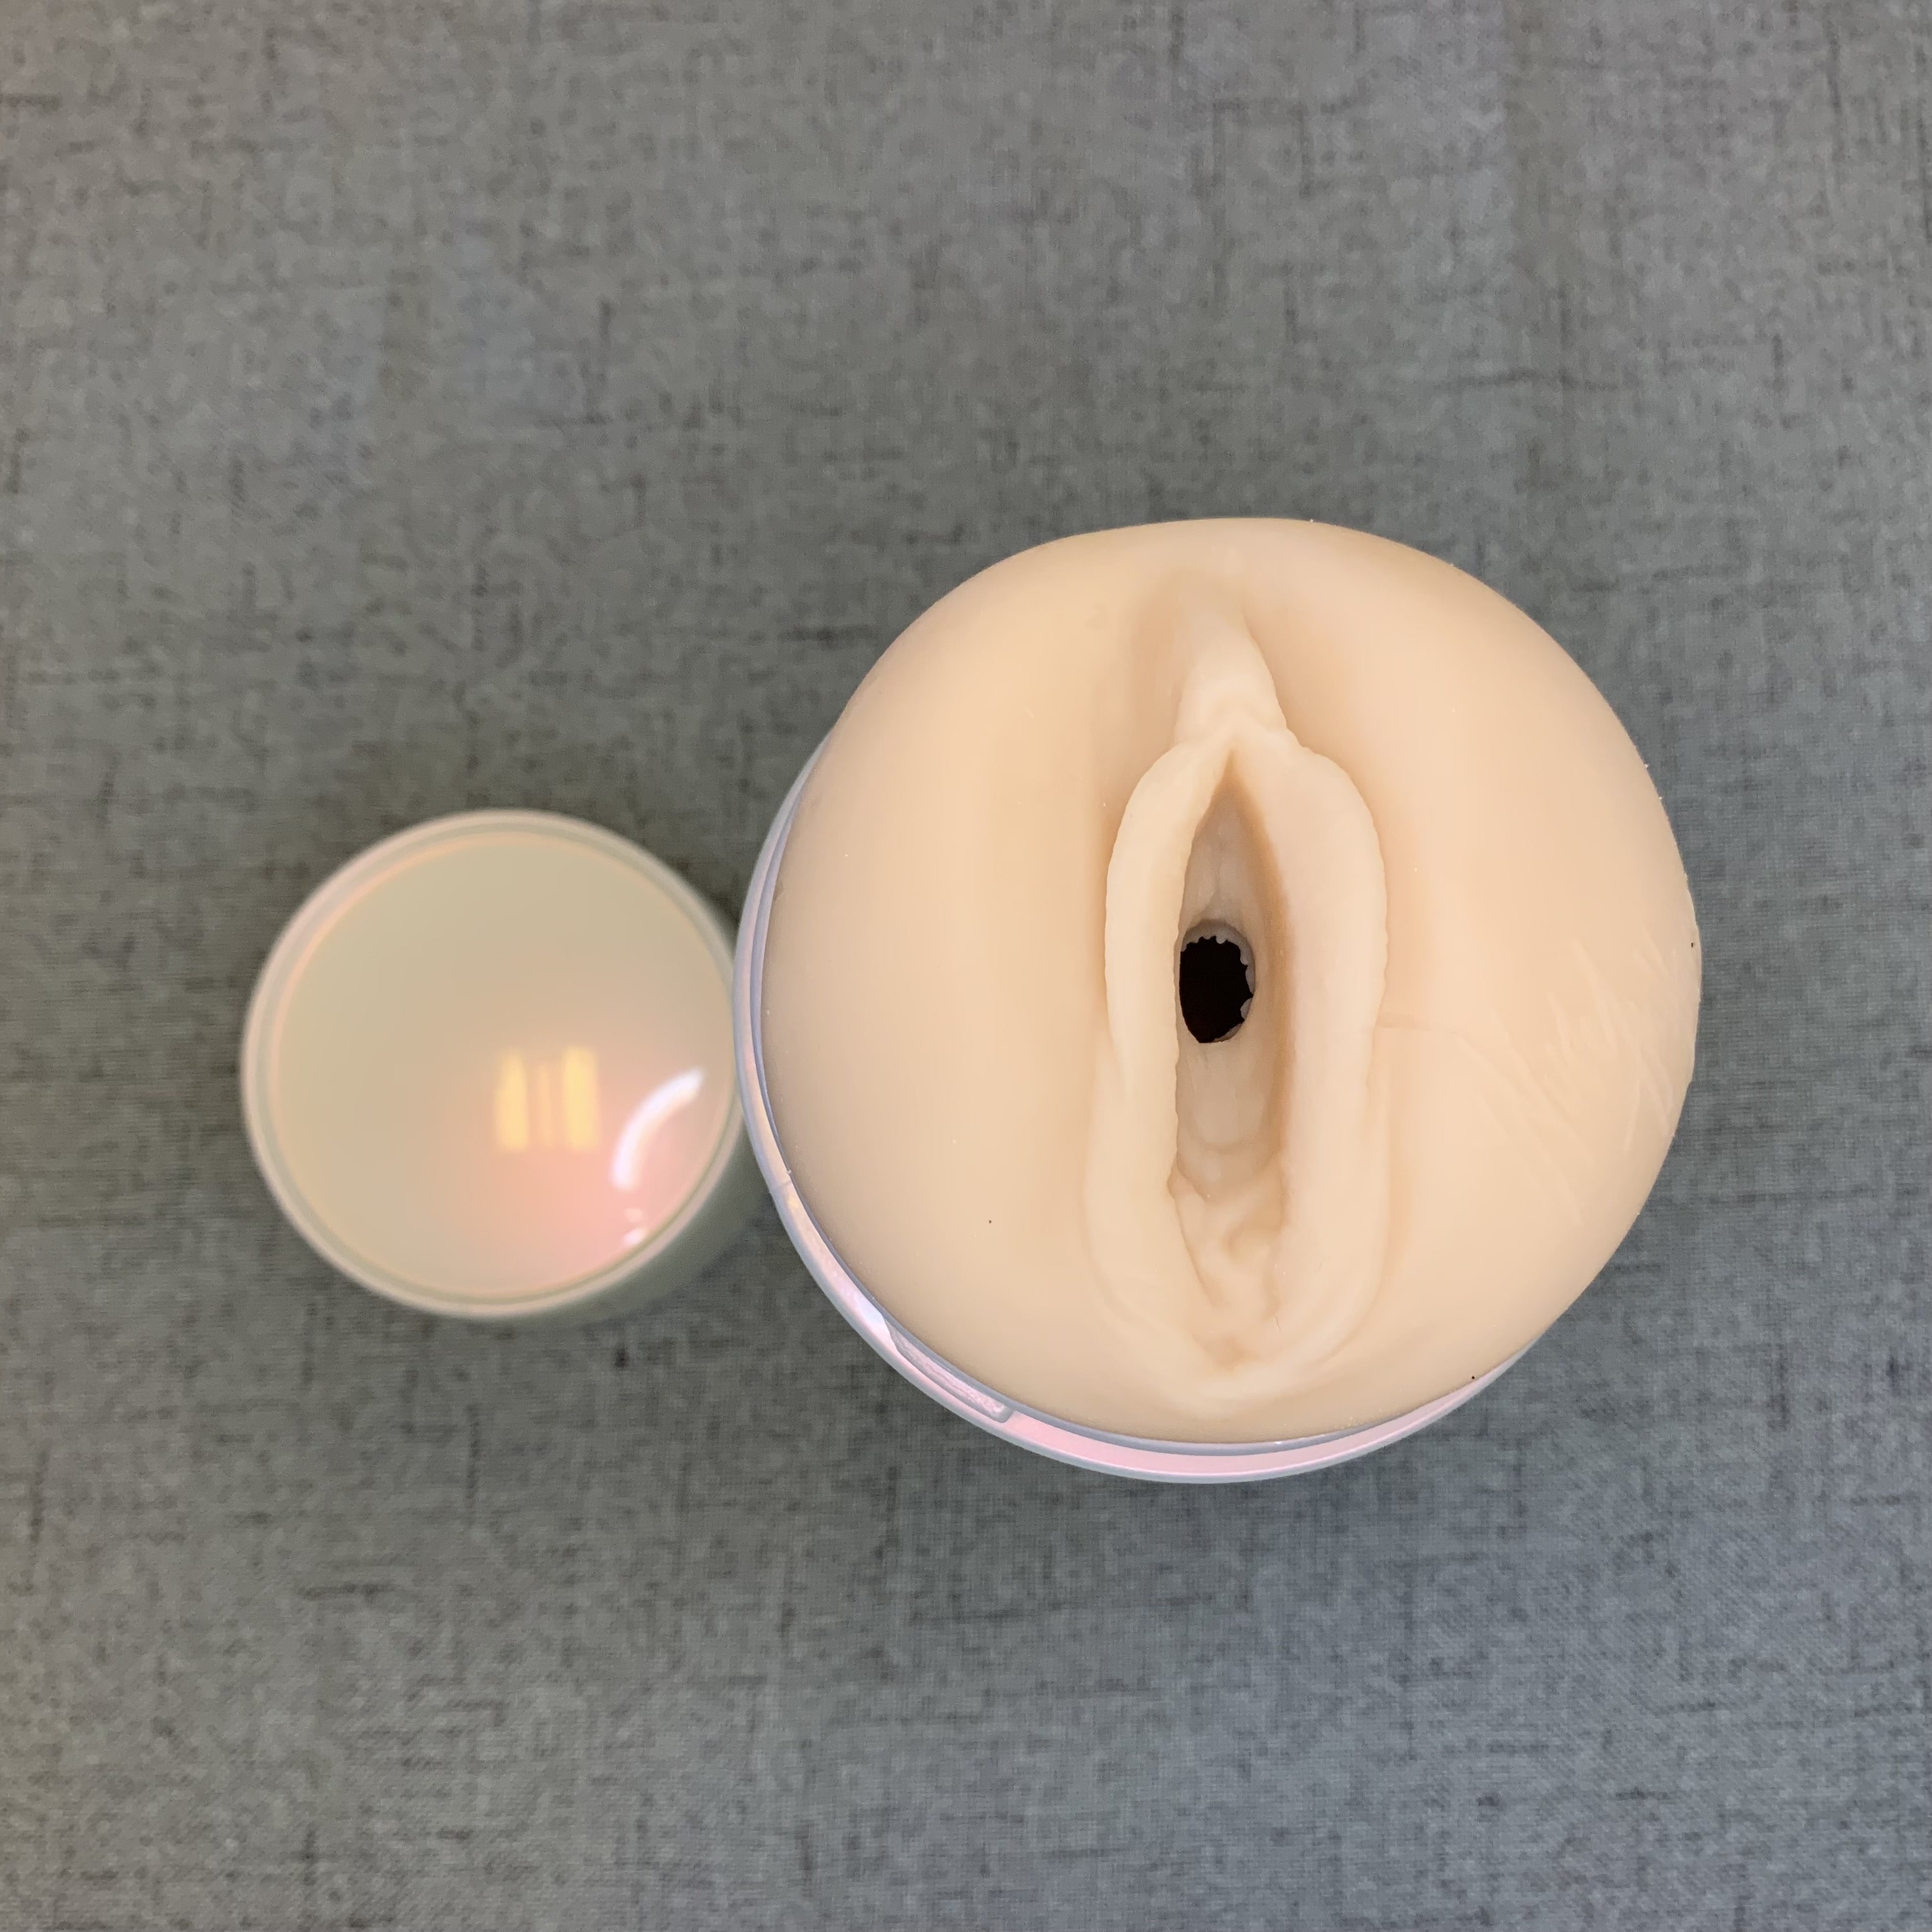 Nicole Aniston Fleshlight Fit Special feature